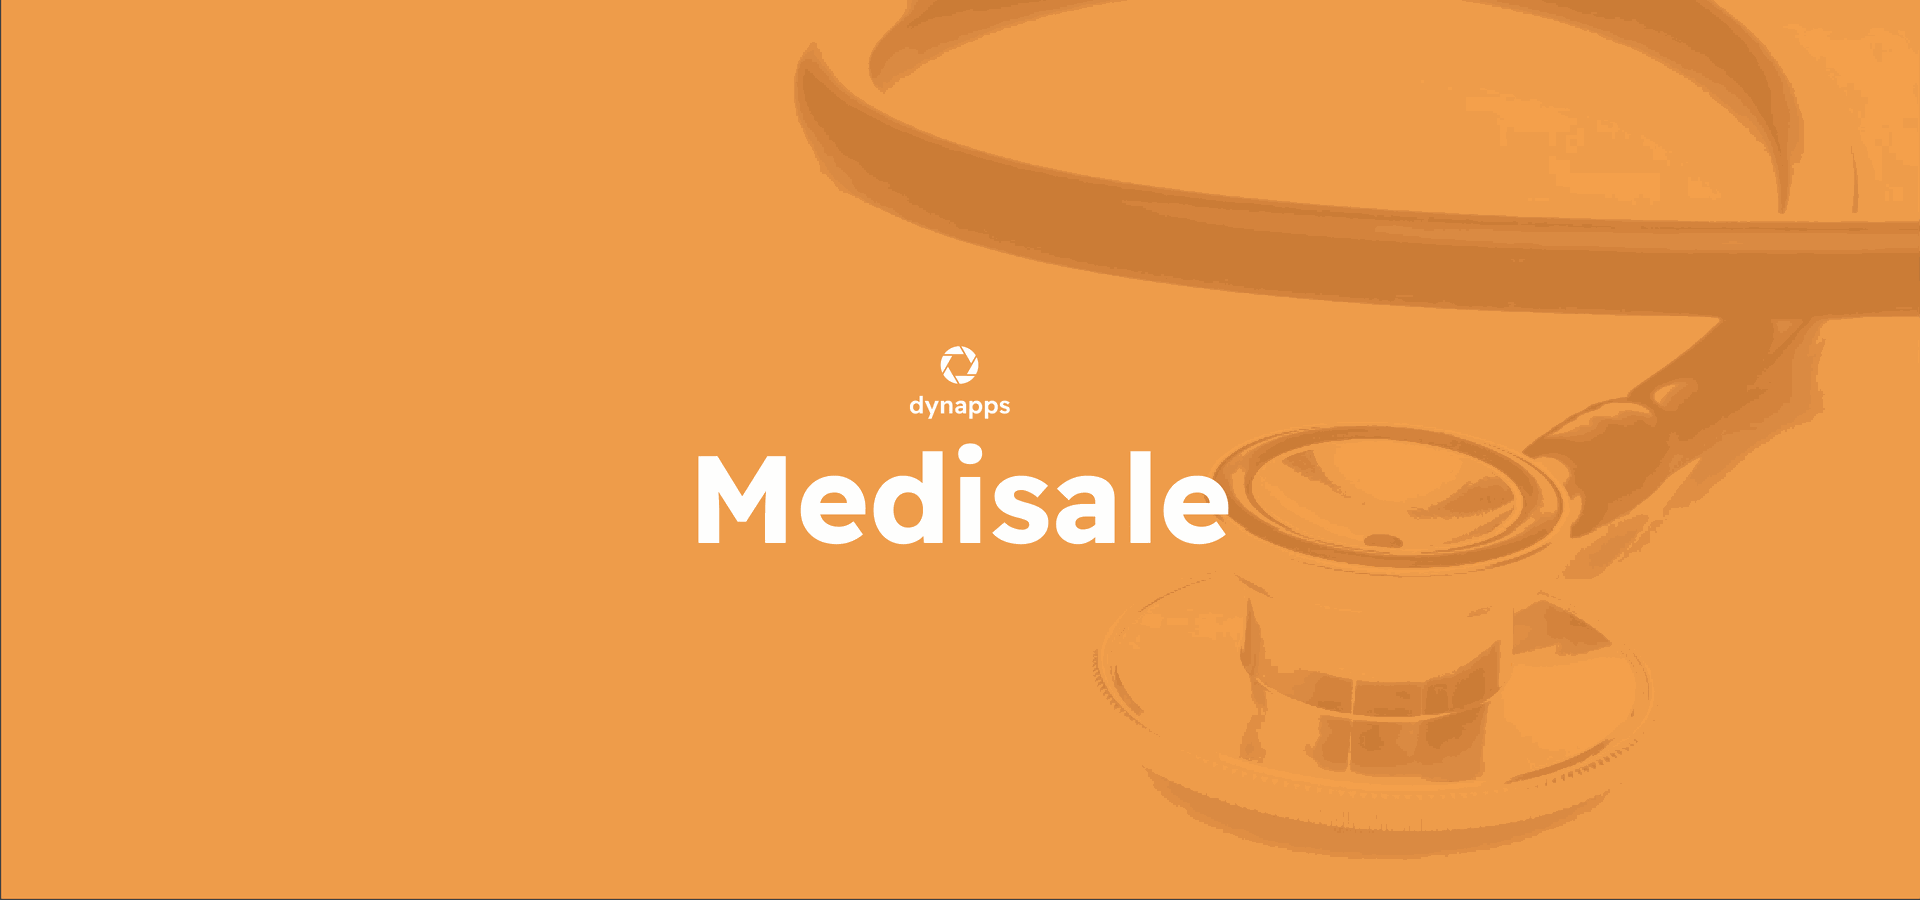 Dynapps supports the growth at Medisale